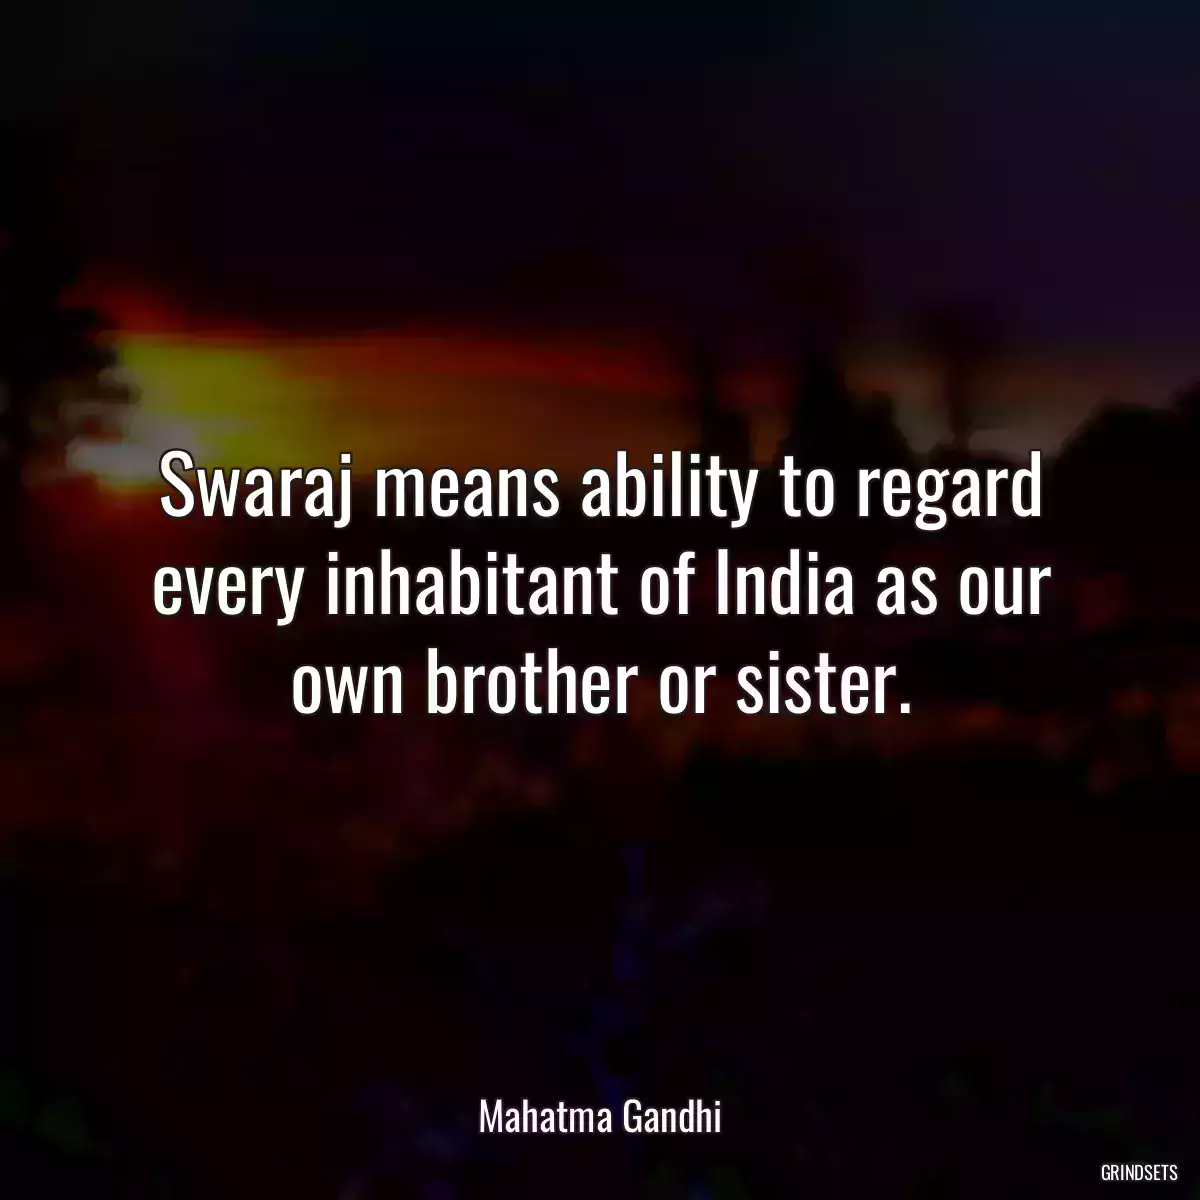 Swaraj means ability to regard every inhabitant of India as our own brother or sister.